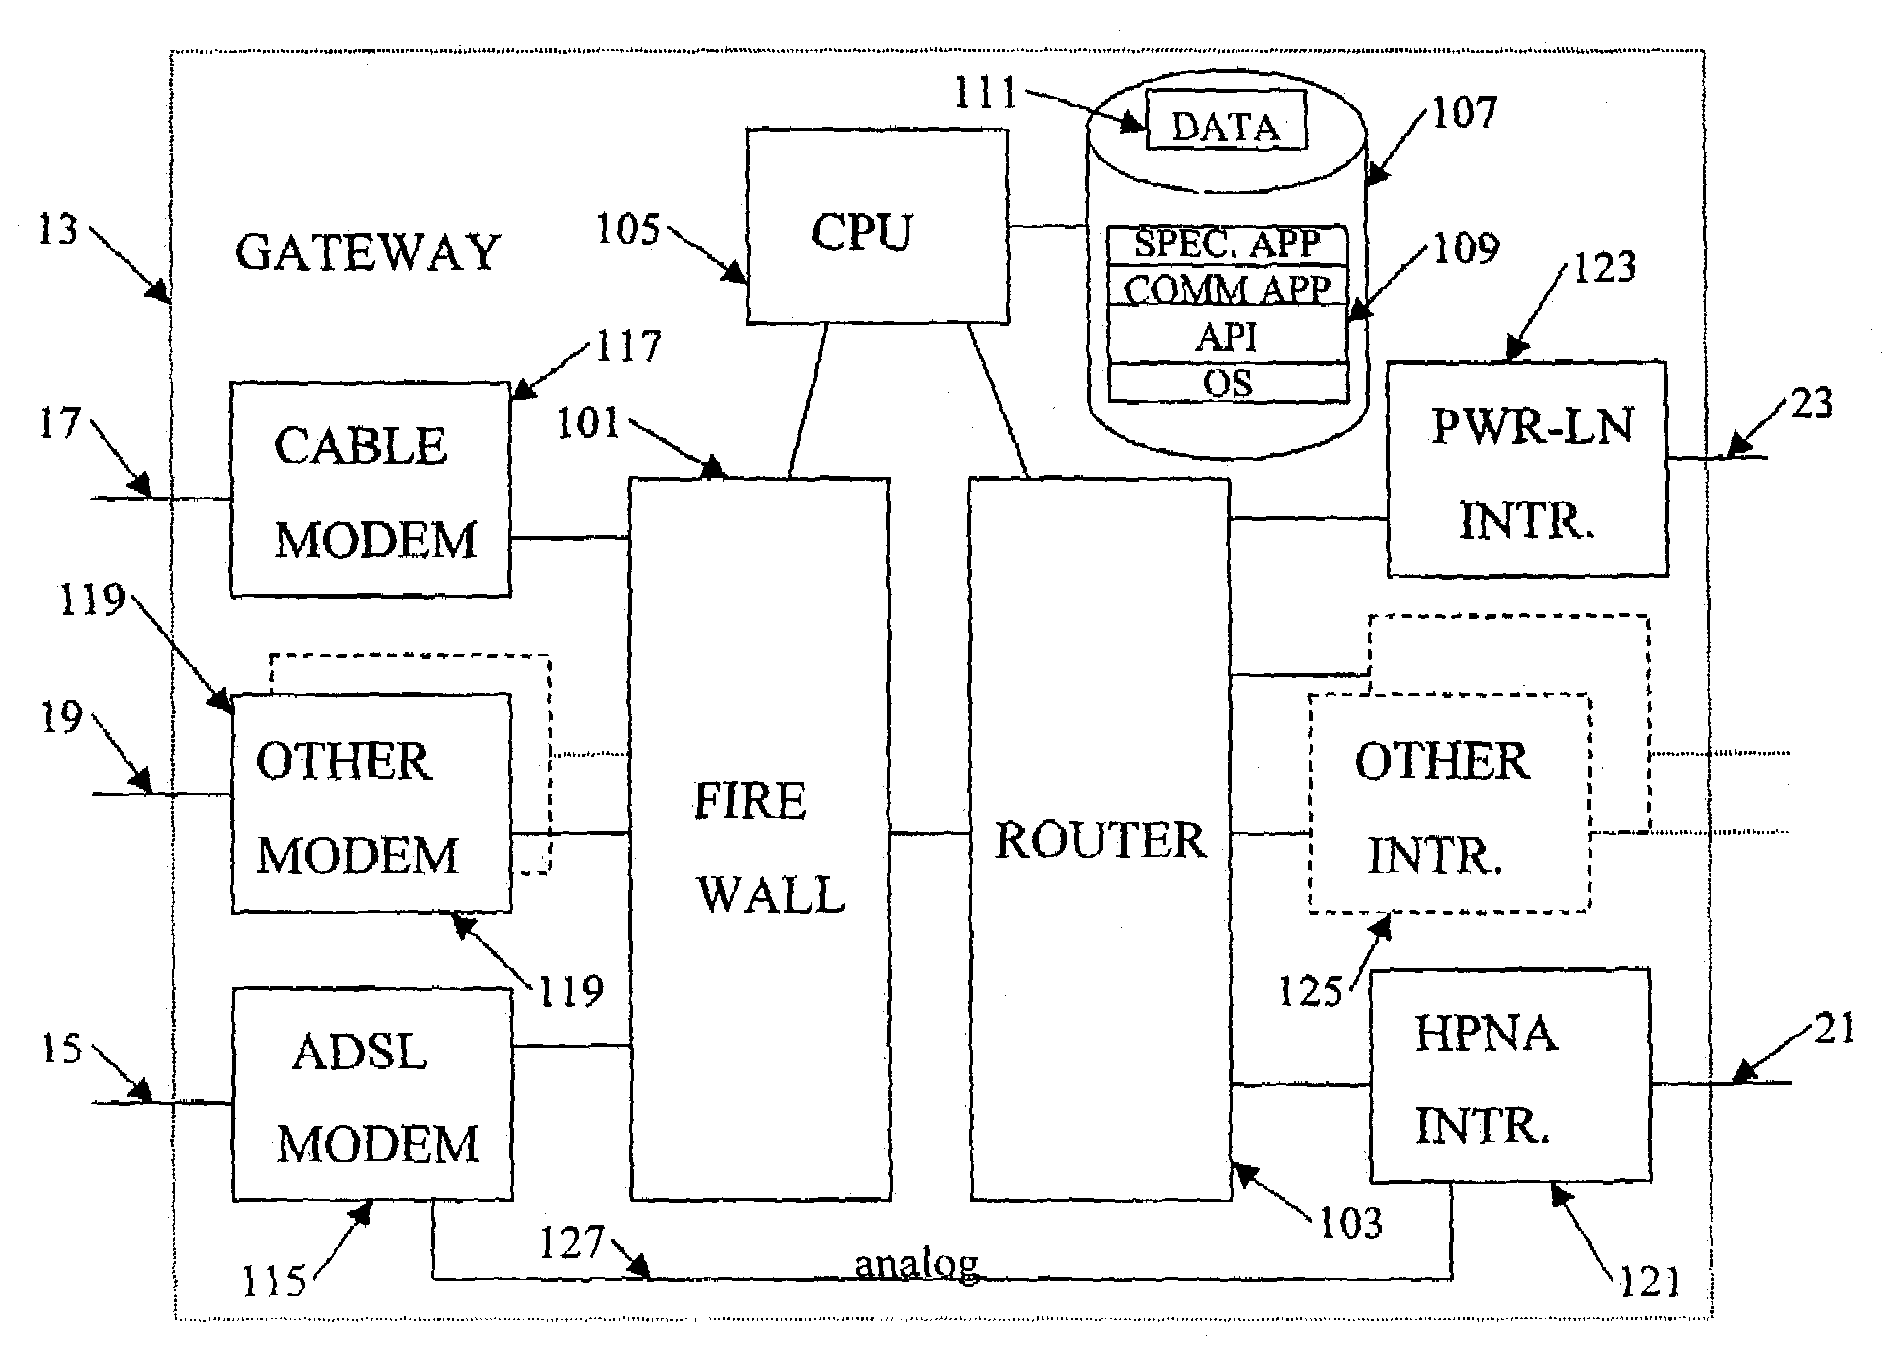 Multi-service in-home network with an open interface